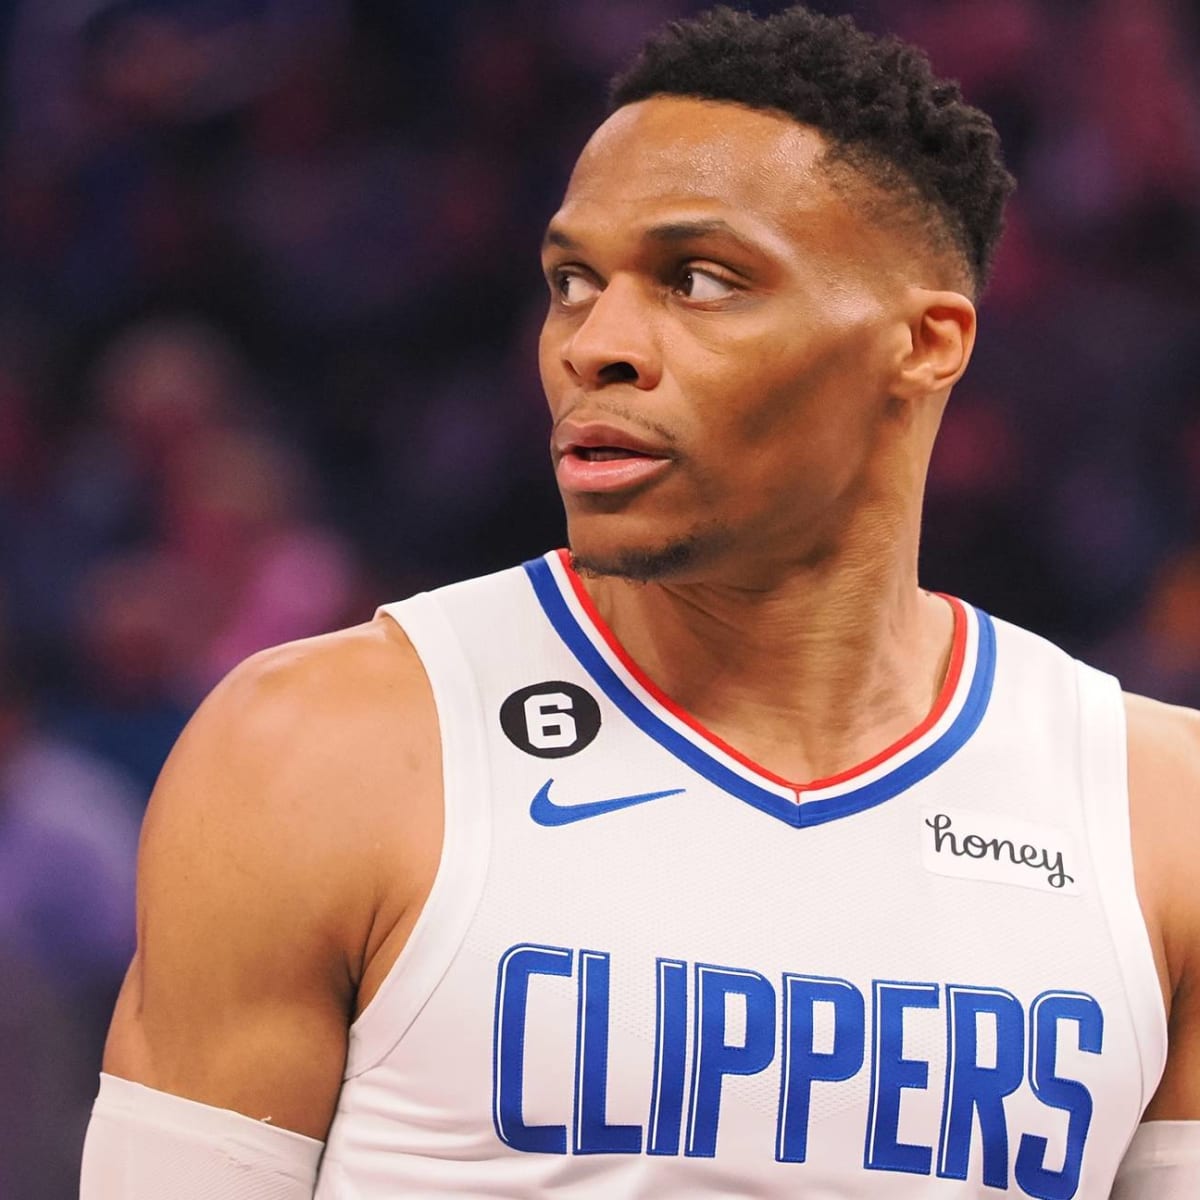 Russell Westbrook, Clippers' Russell Westbrook Trade To The Heat In Bold Proposal